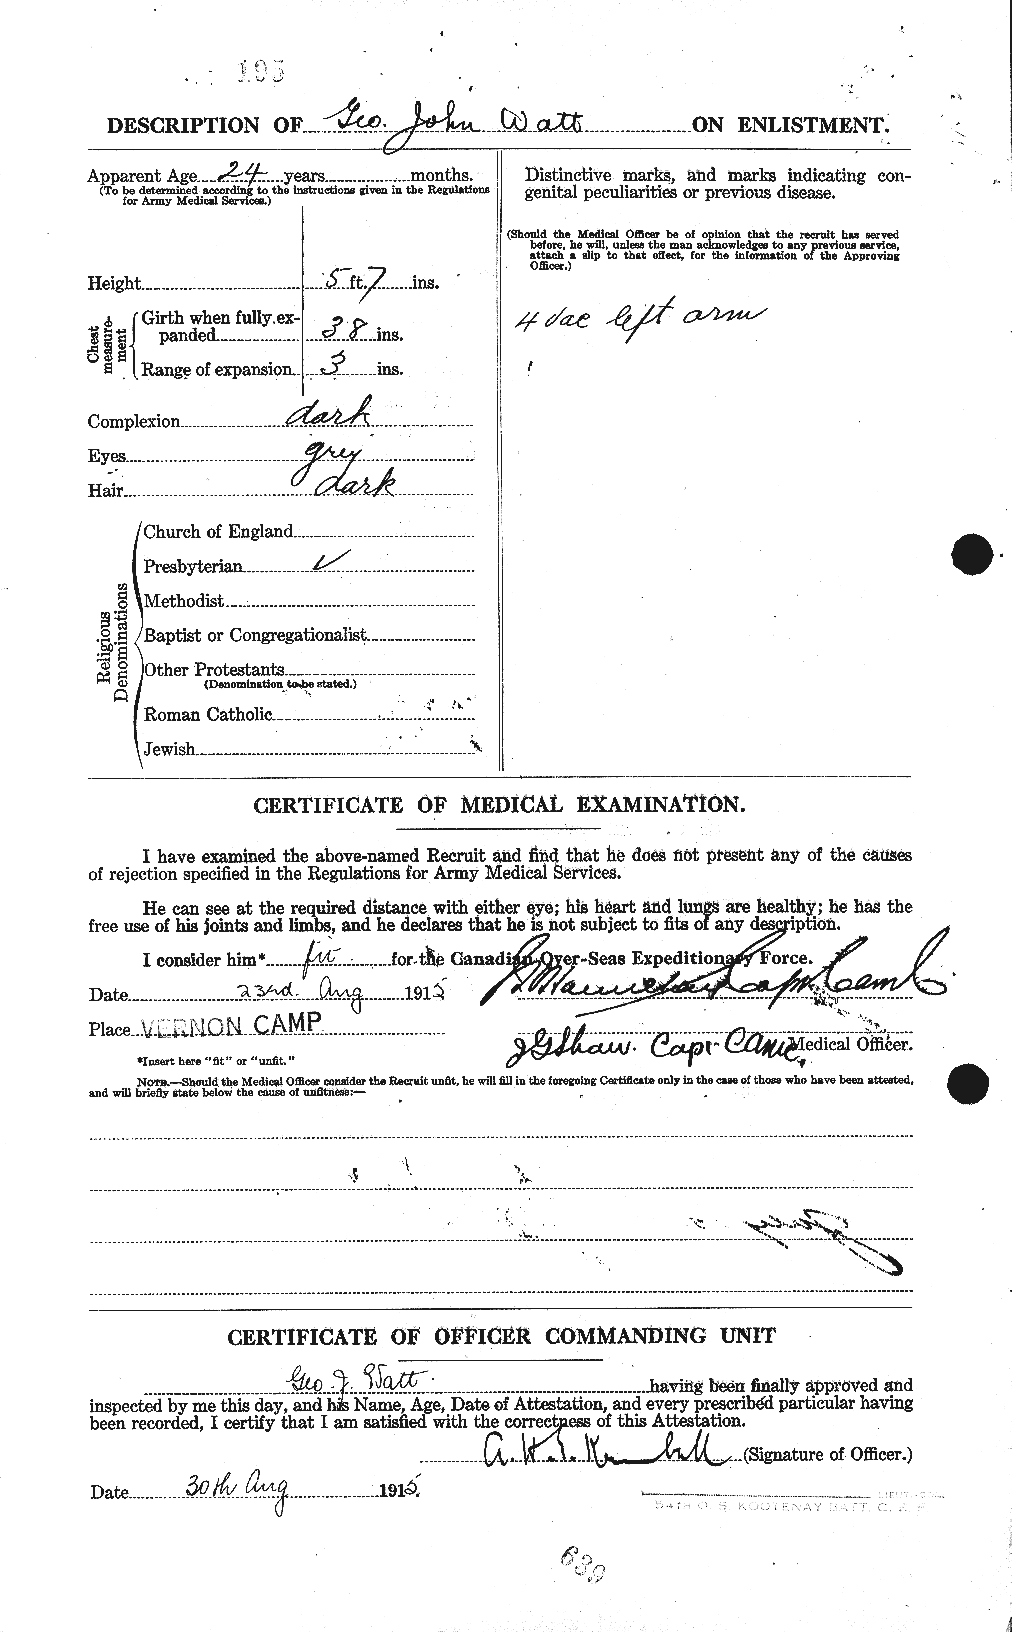 Personnel Records of the First World War - CEF 664434b